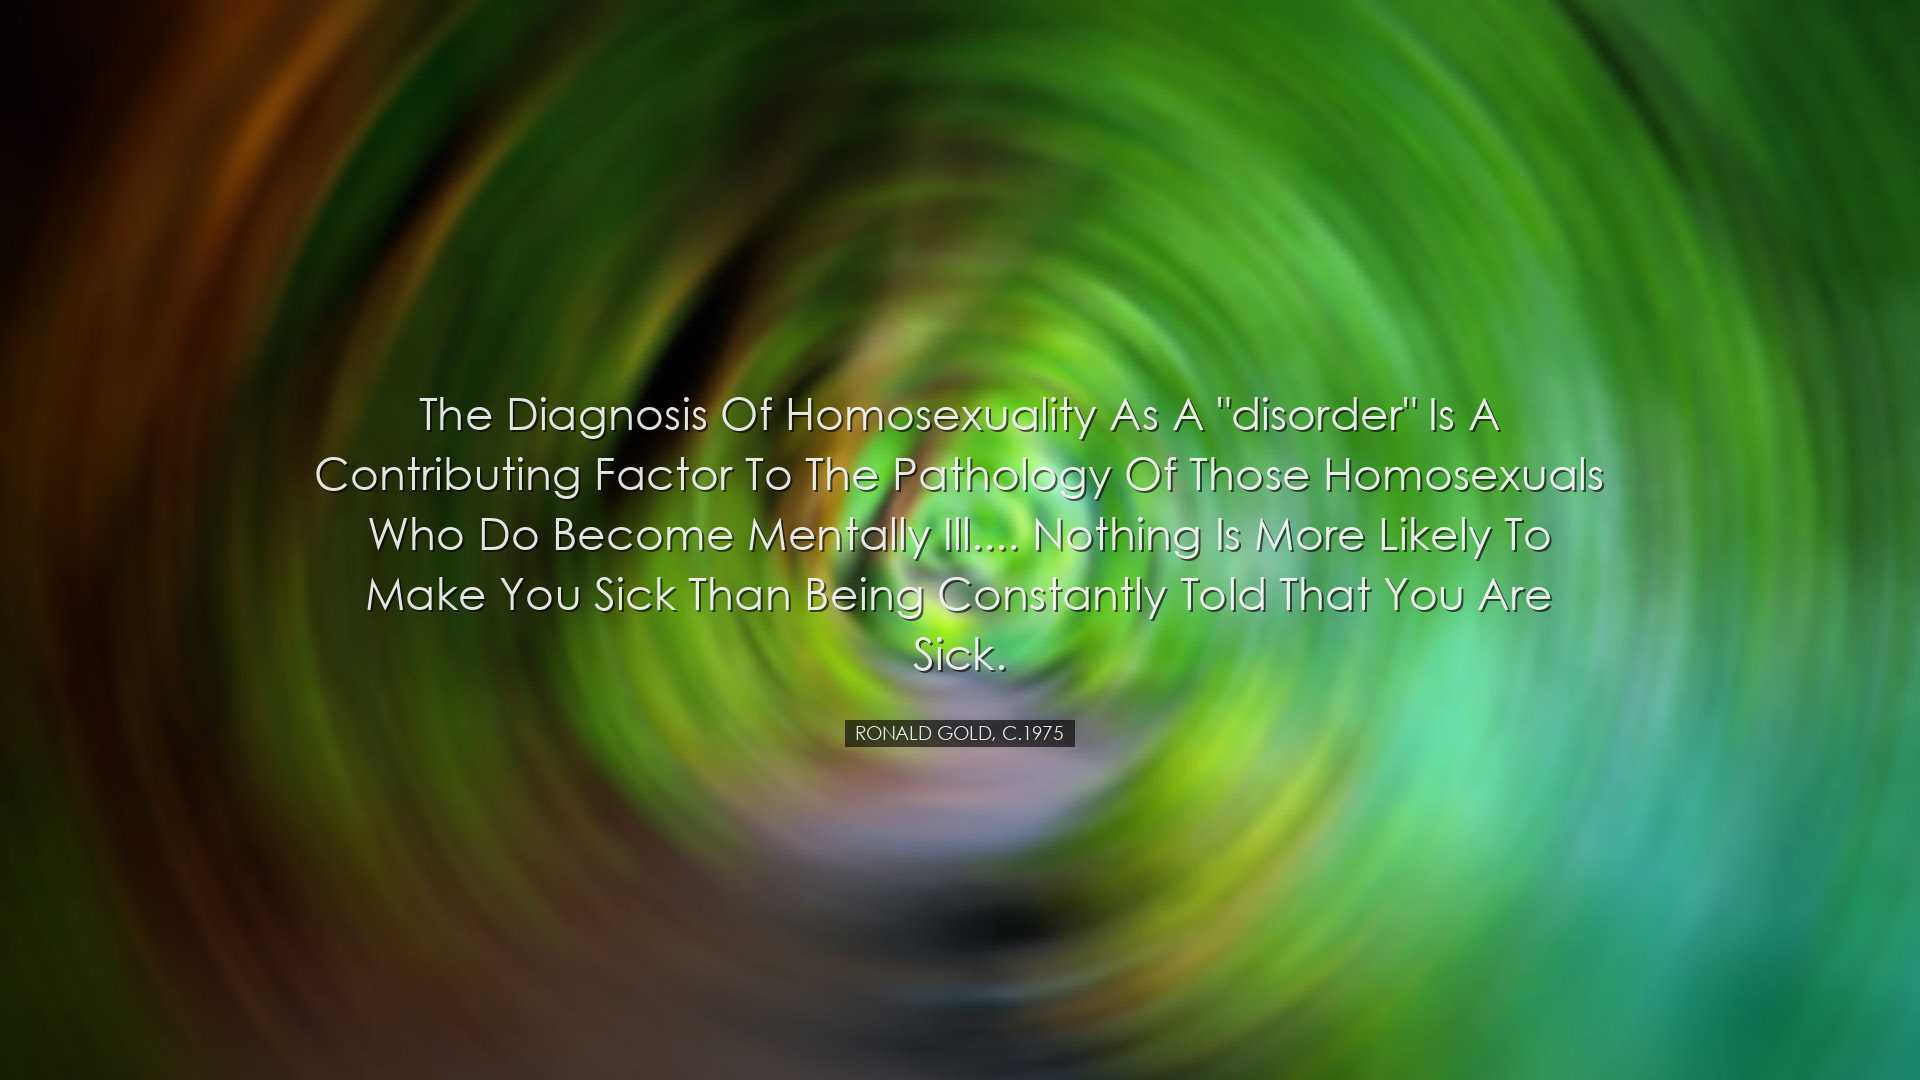 The diagnosis of homosexuality as a 